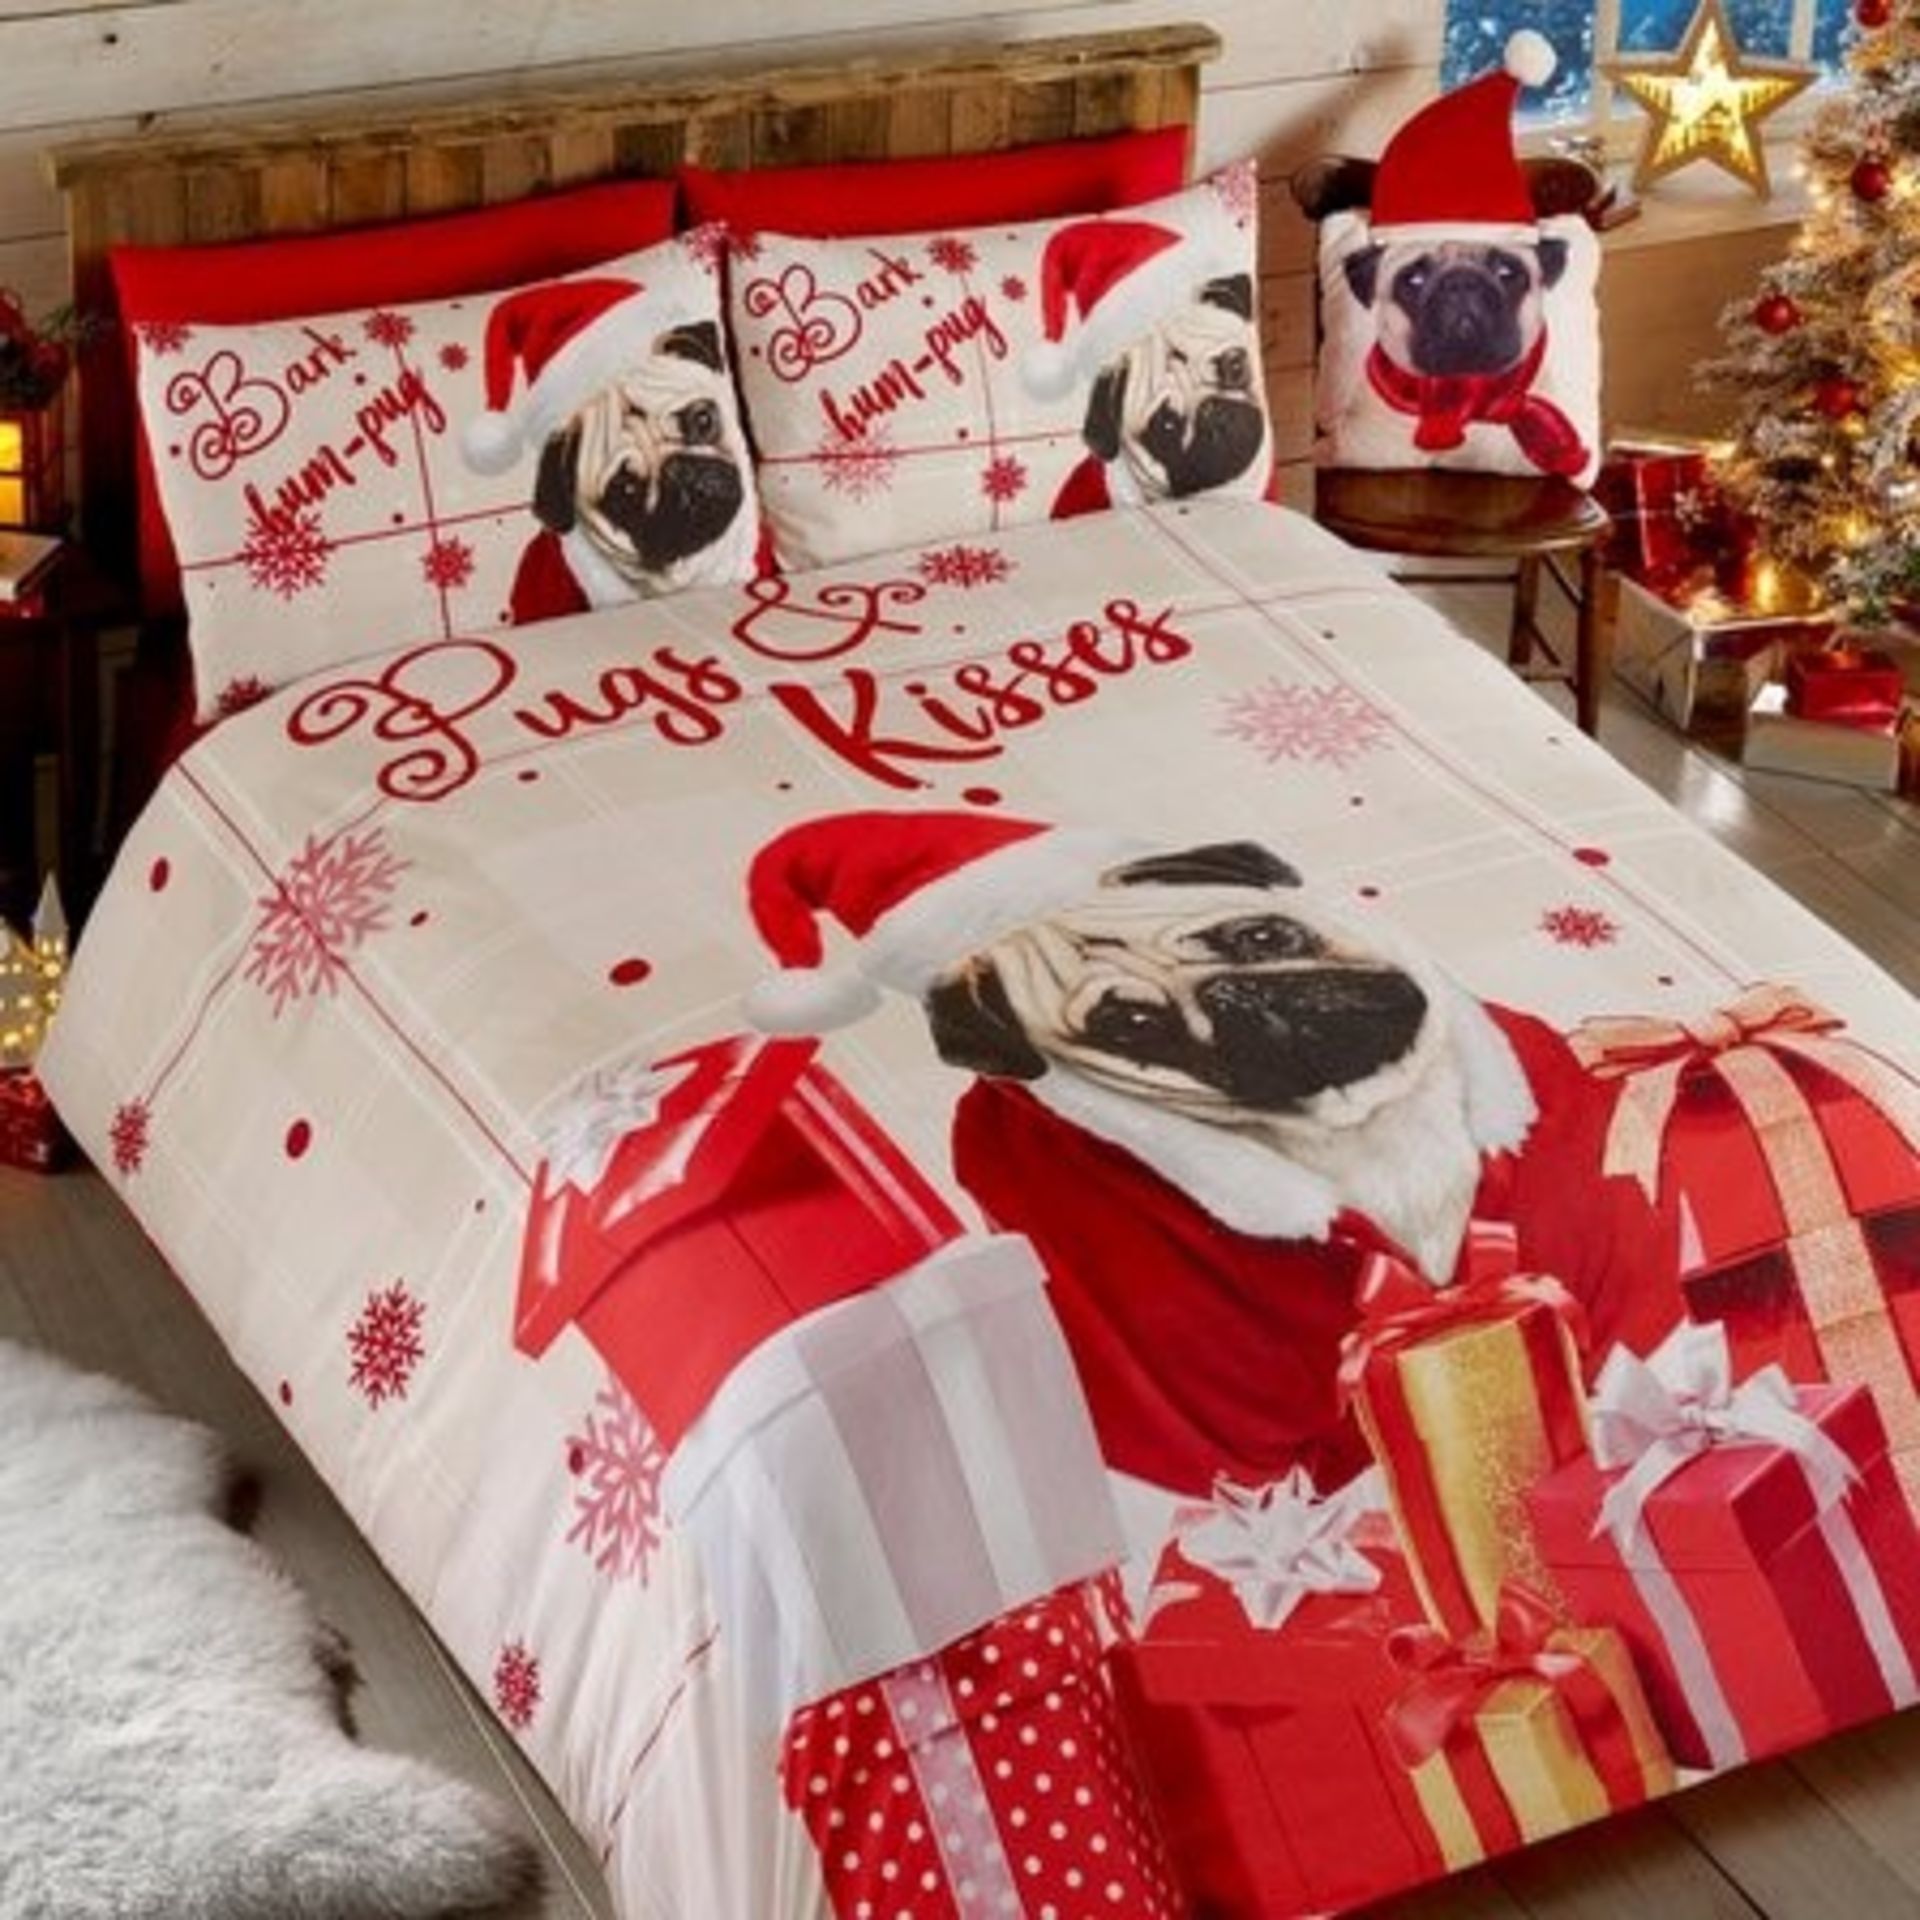 1 AS NEW PACKED CHRISTMAS HUM PUG SINGLE DUVET SET IN RED (VIEWING HIGHLY RECOMMENDED)